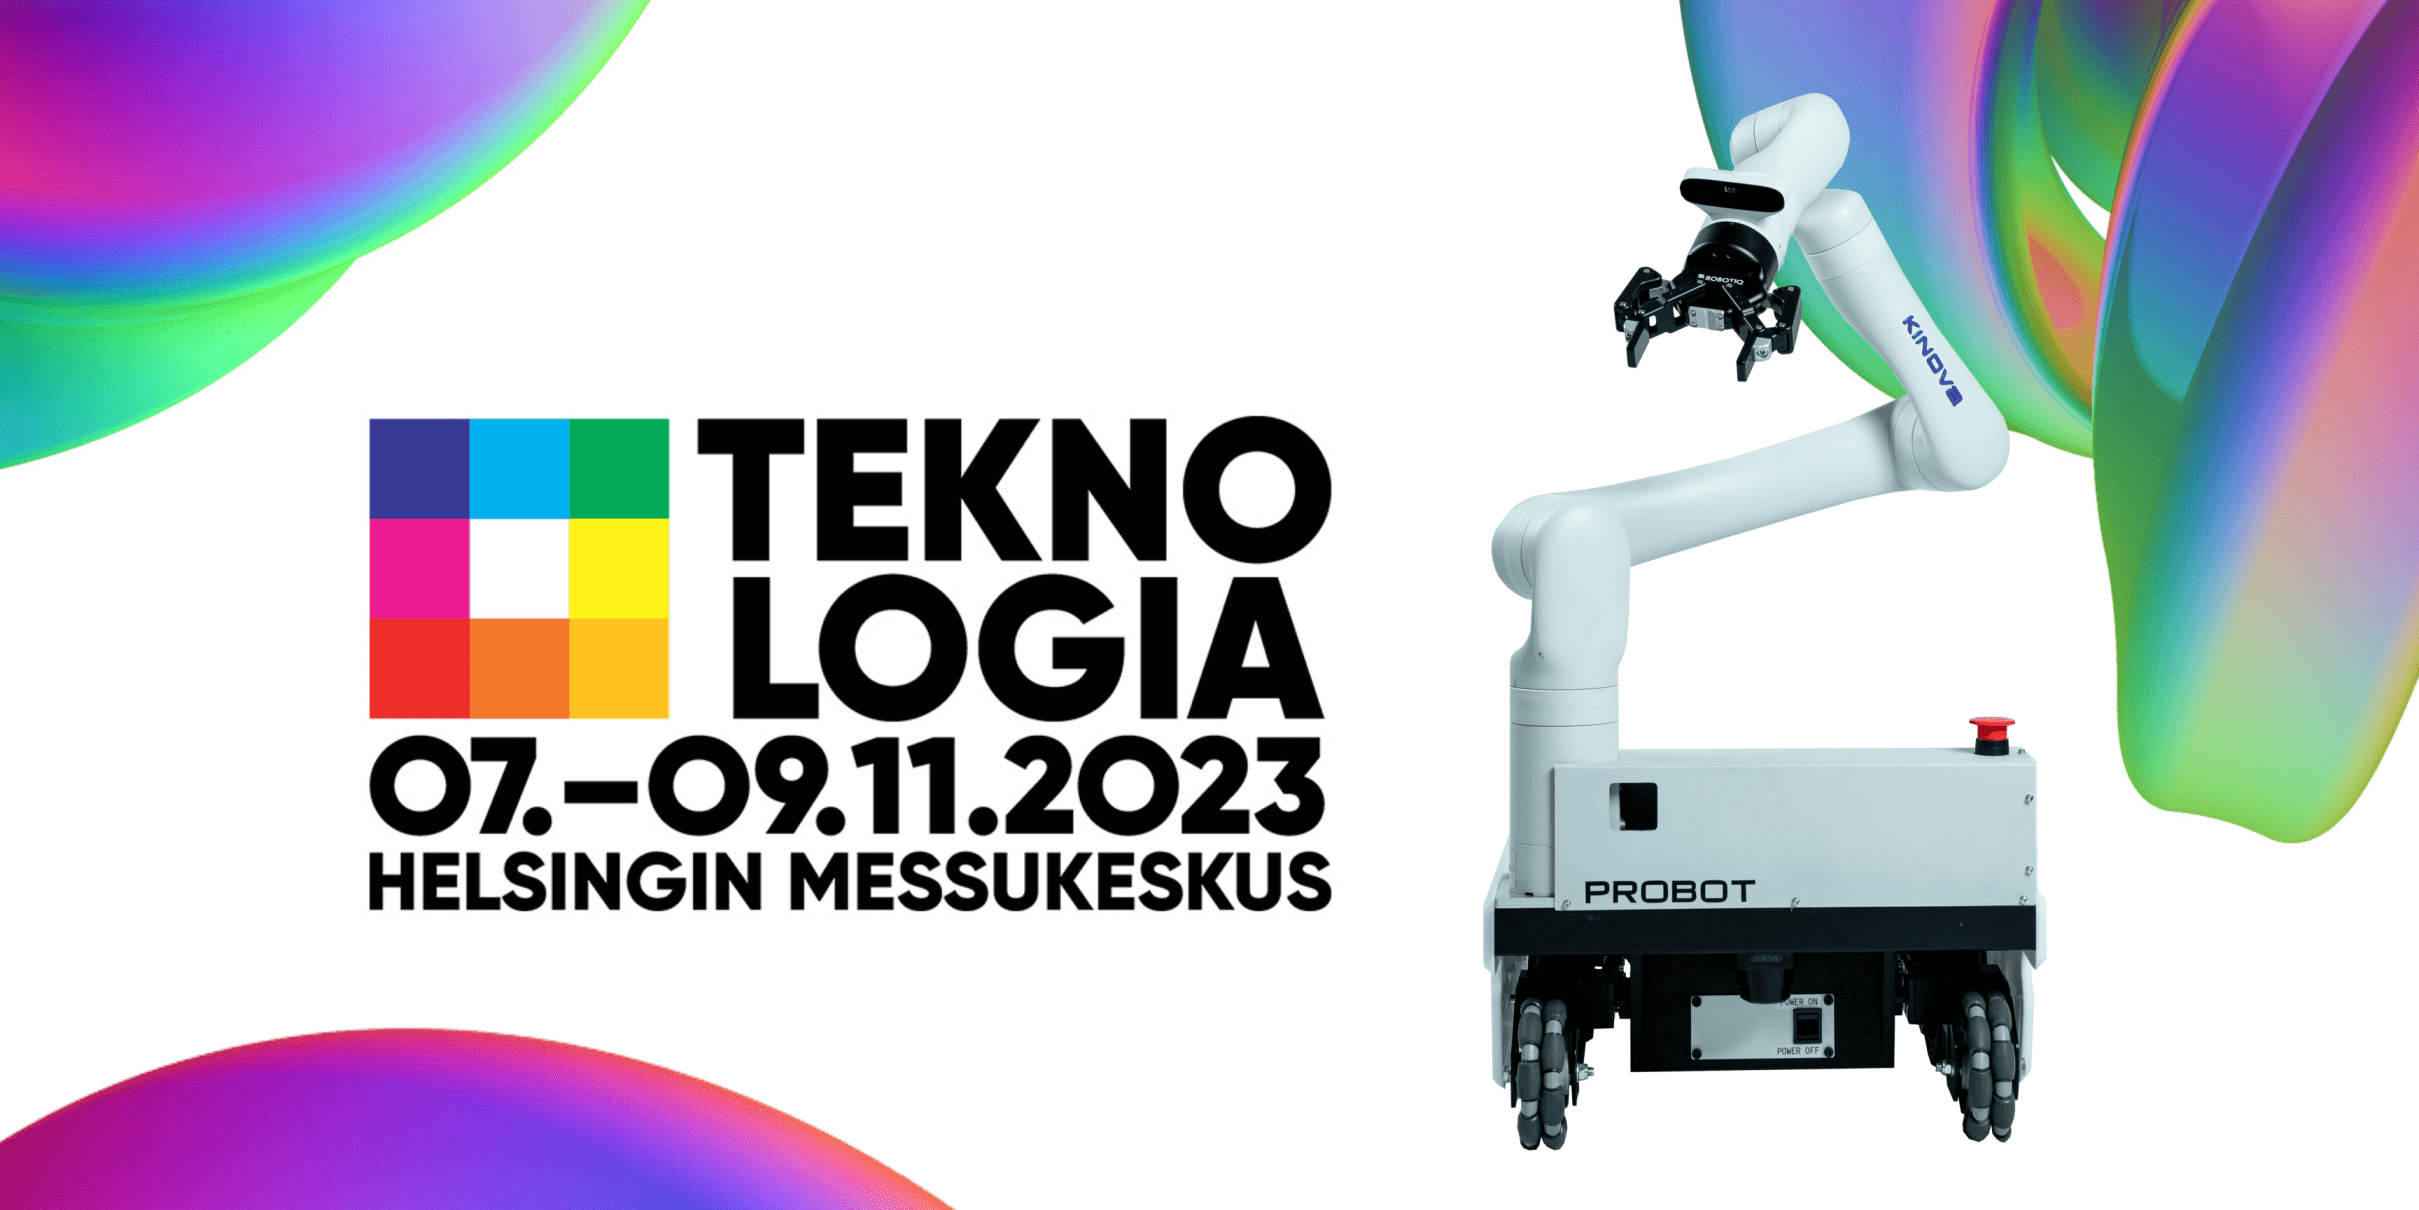 Teknologia 23 will be held at the Helsinki Exhibition Centre 7-9.11.2023, where the mobile robot Dolly™ will be launched.